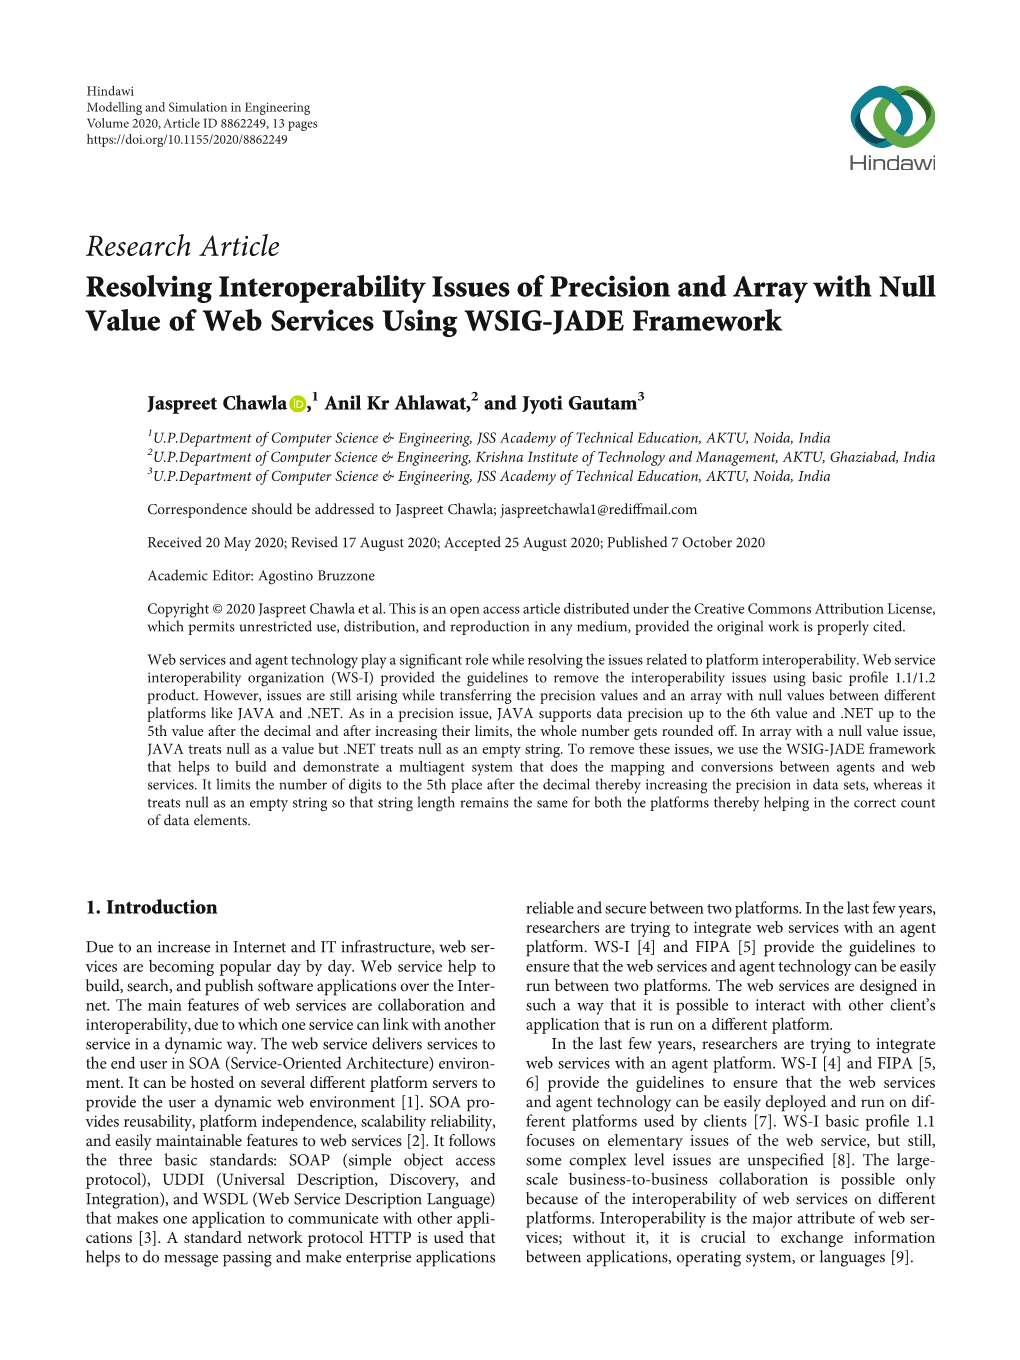 Resolving Interoperability Issues of Precision and Array with Null Value of Web Services Using WSIG-JADE Framework